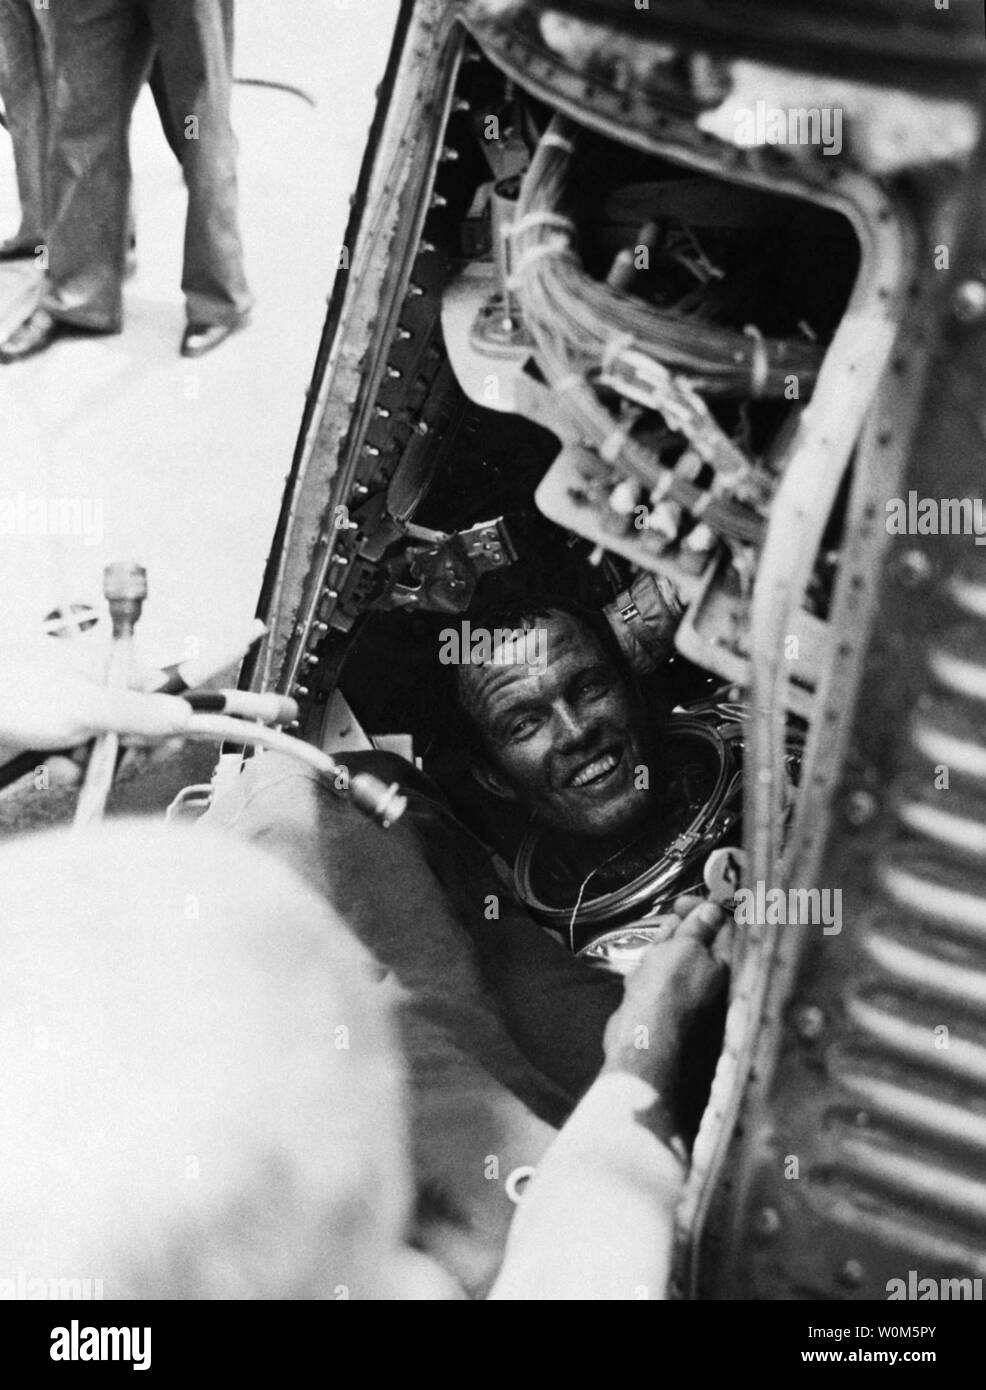 Gordon Cooper Jr., one of America's first seven astronauts, died on October 4, 2004 at his home in Ventura, Calif. He was 77 years old.  Cooper piloted the sixth and last flight of the Mercury program and later commanded Gemini 5.   In this file photo, Cooper emerges from his Mercury capsule after the record-setting Faith 7 flight.  (UPI Photo/NASA) Stock Photo